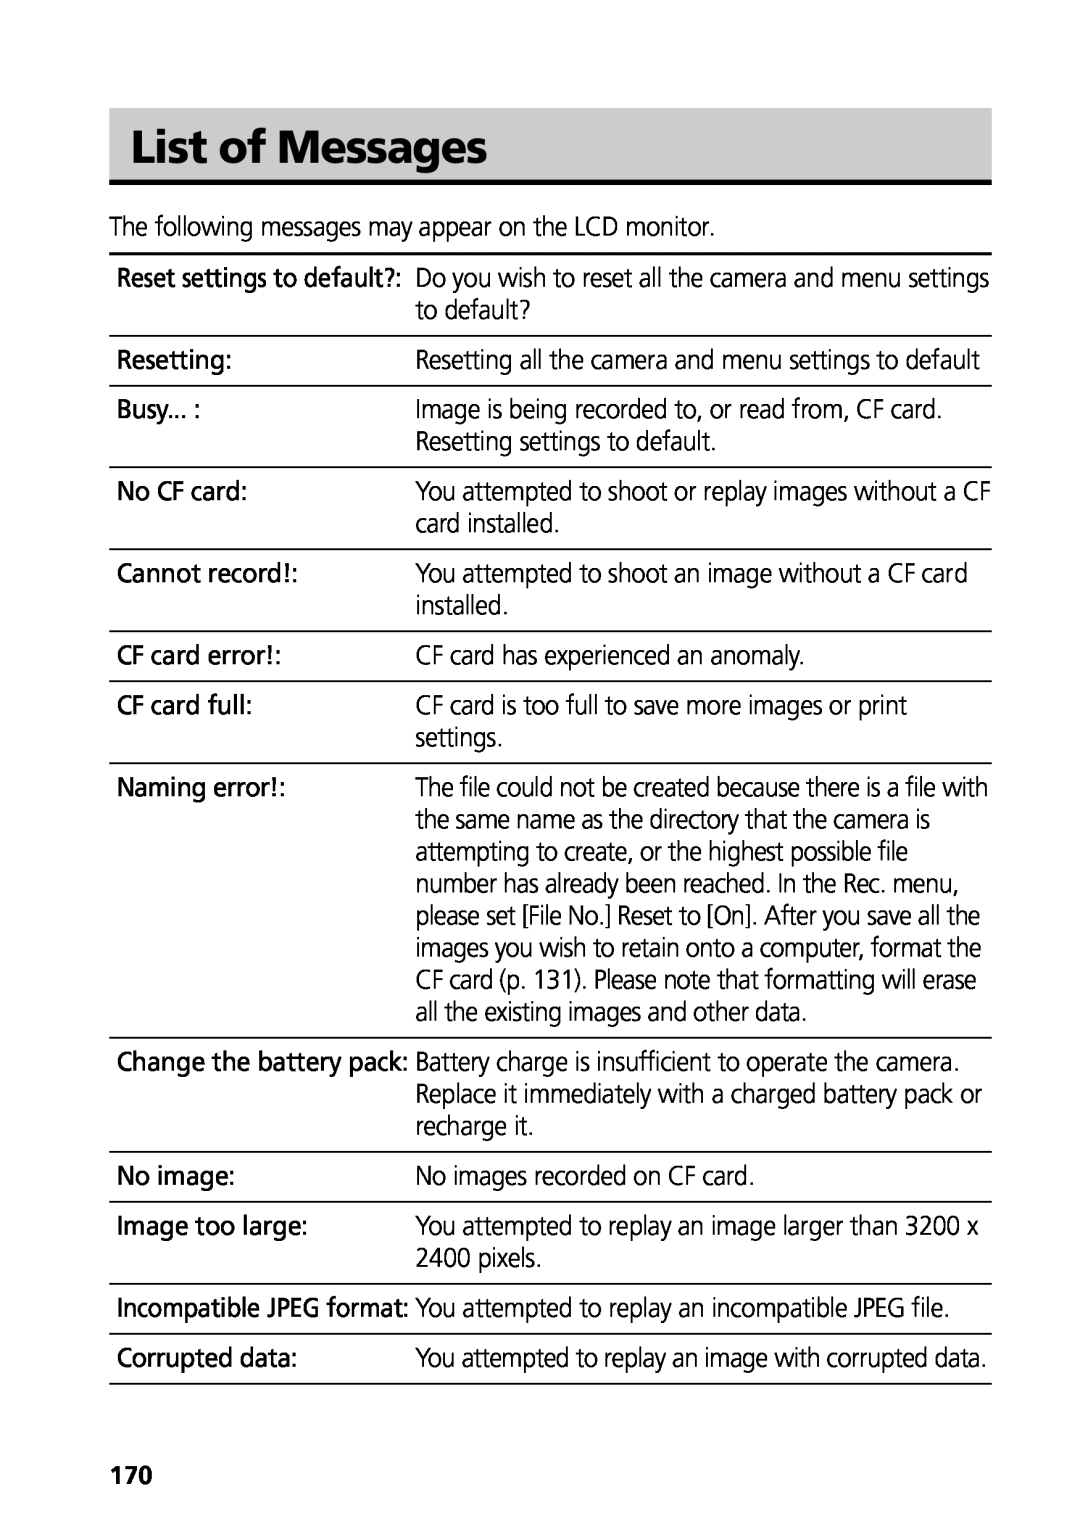 Canon G3 manual List of Messages 